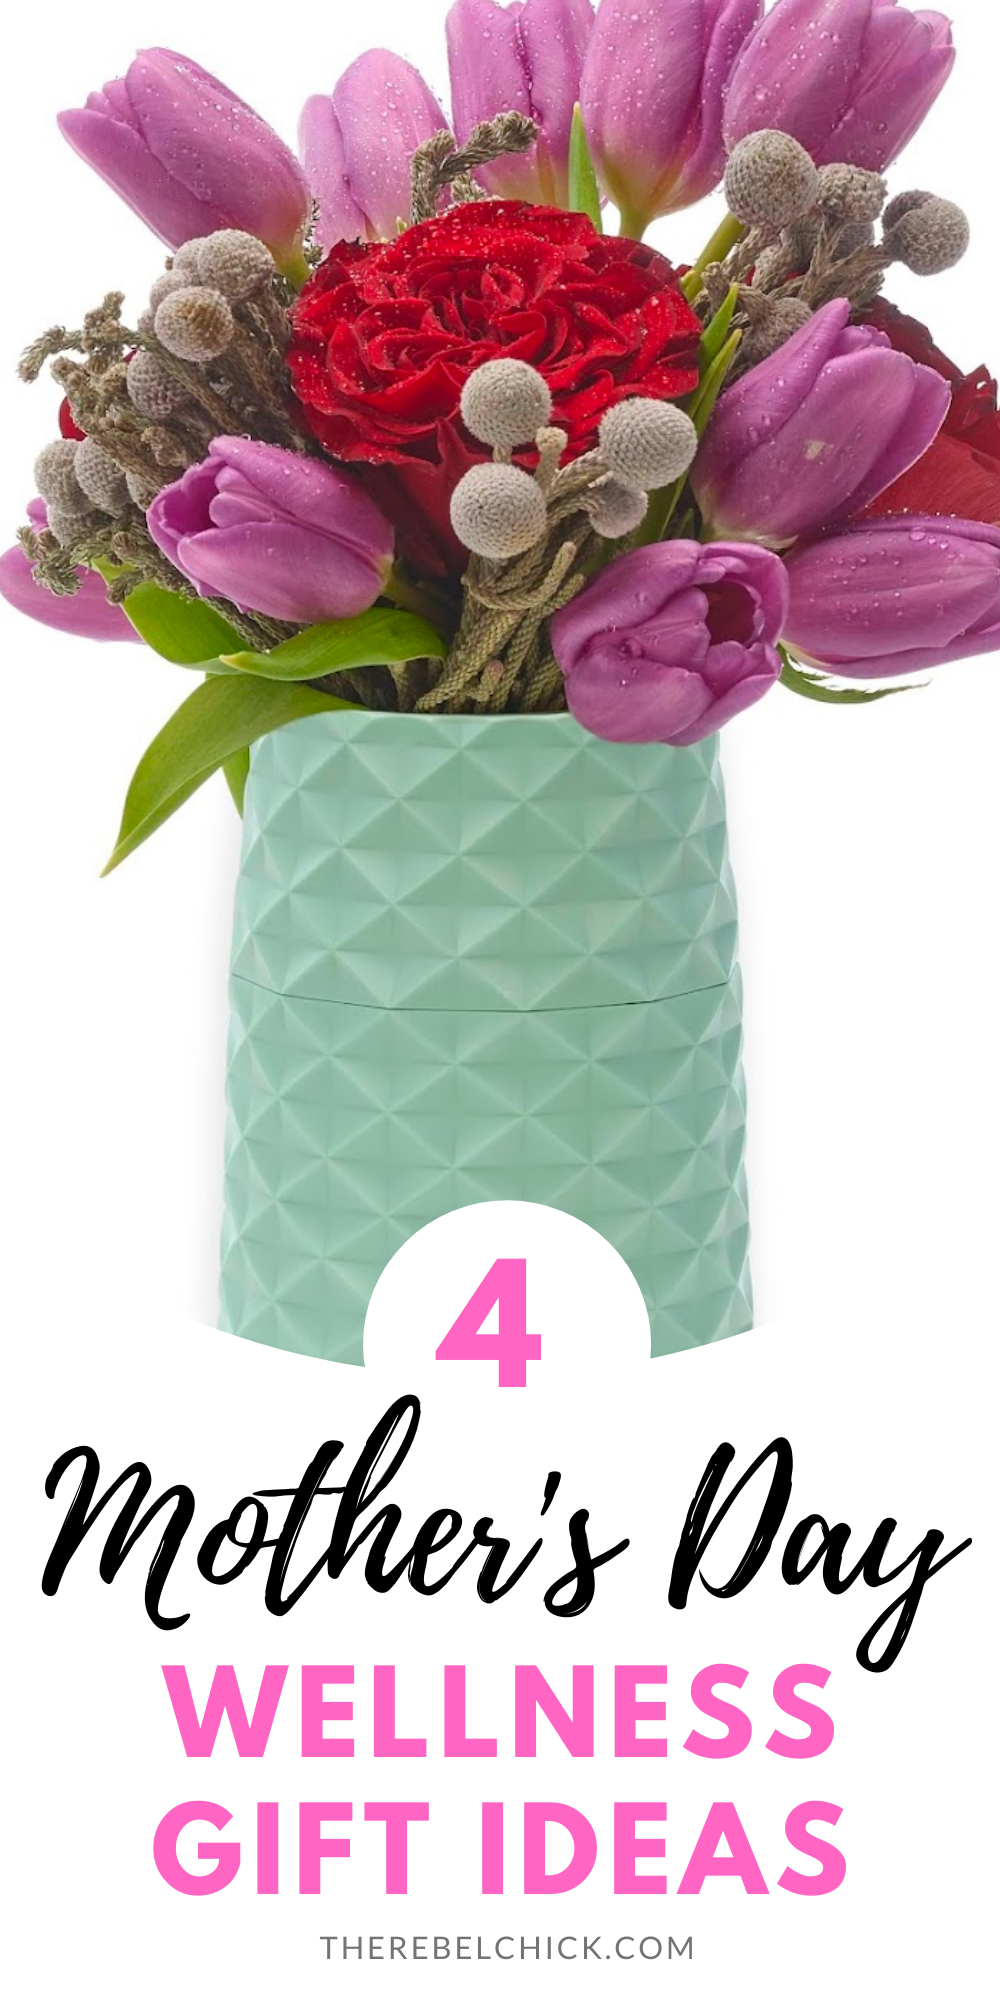 Mother’s Day Wellness Gift Ideas